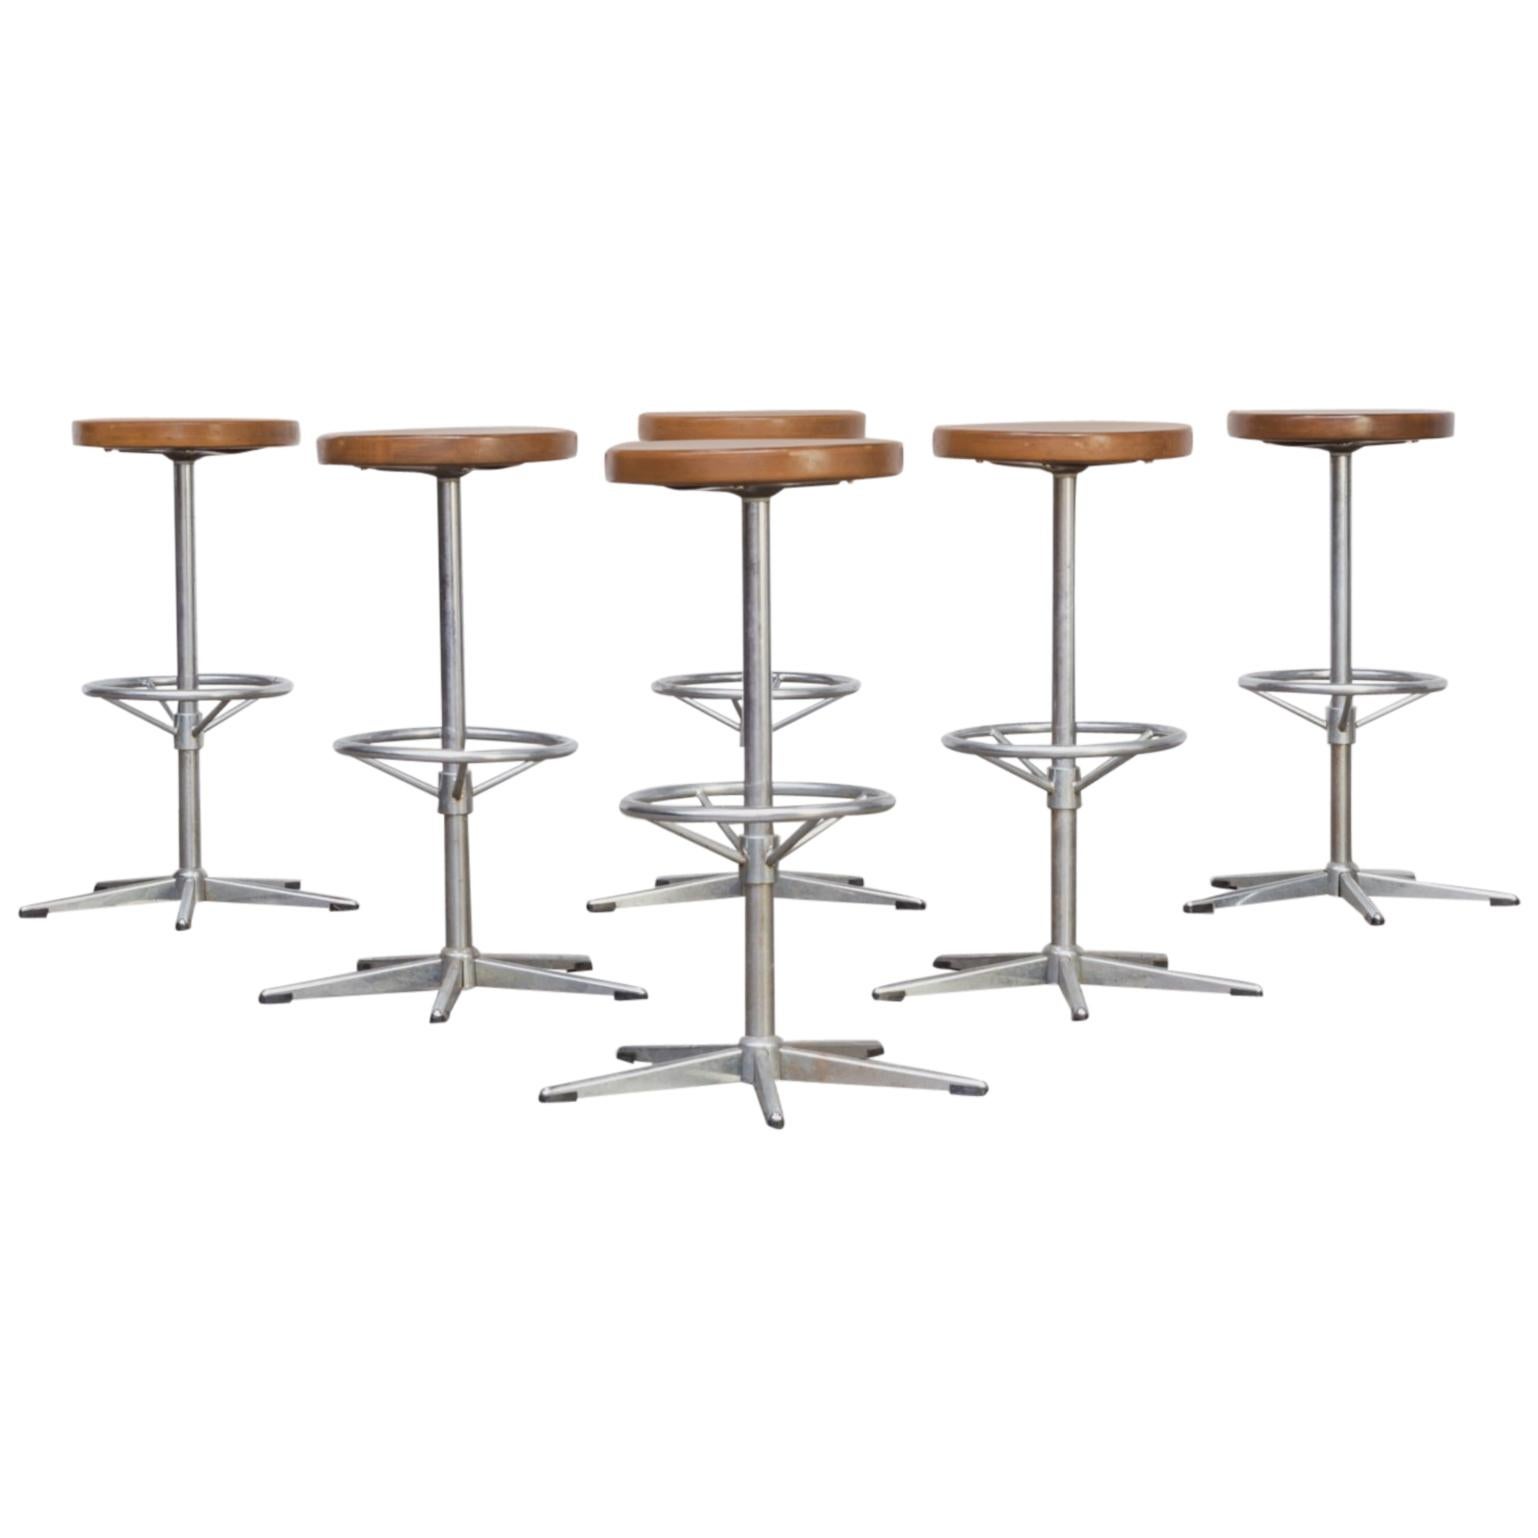 Midcentury Chrome Framed Stools with Wooden Seat Set of Six For Sale